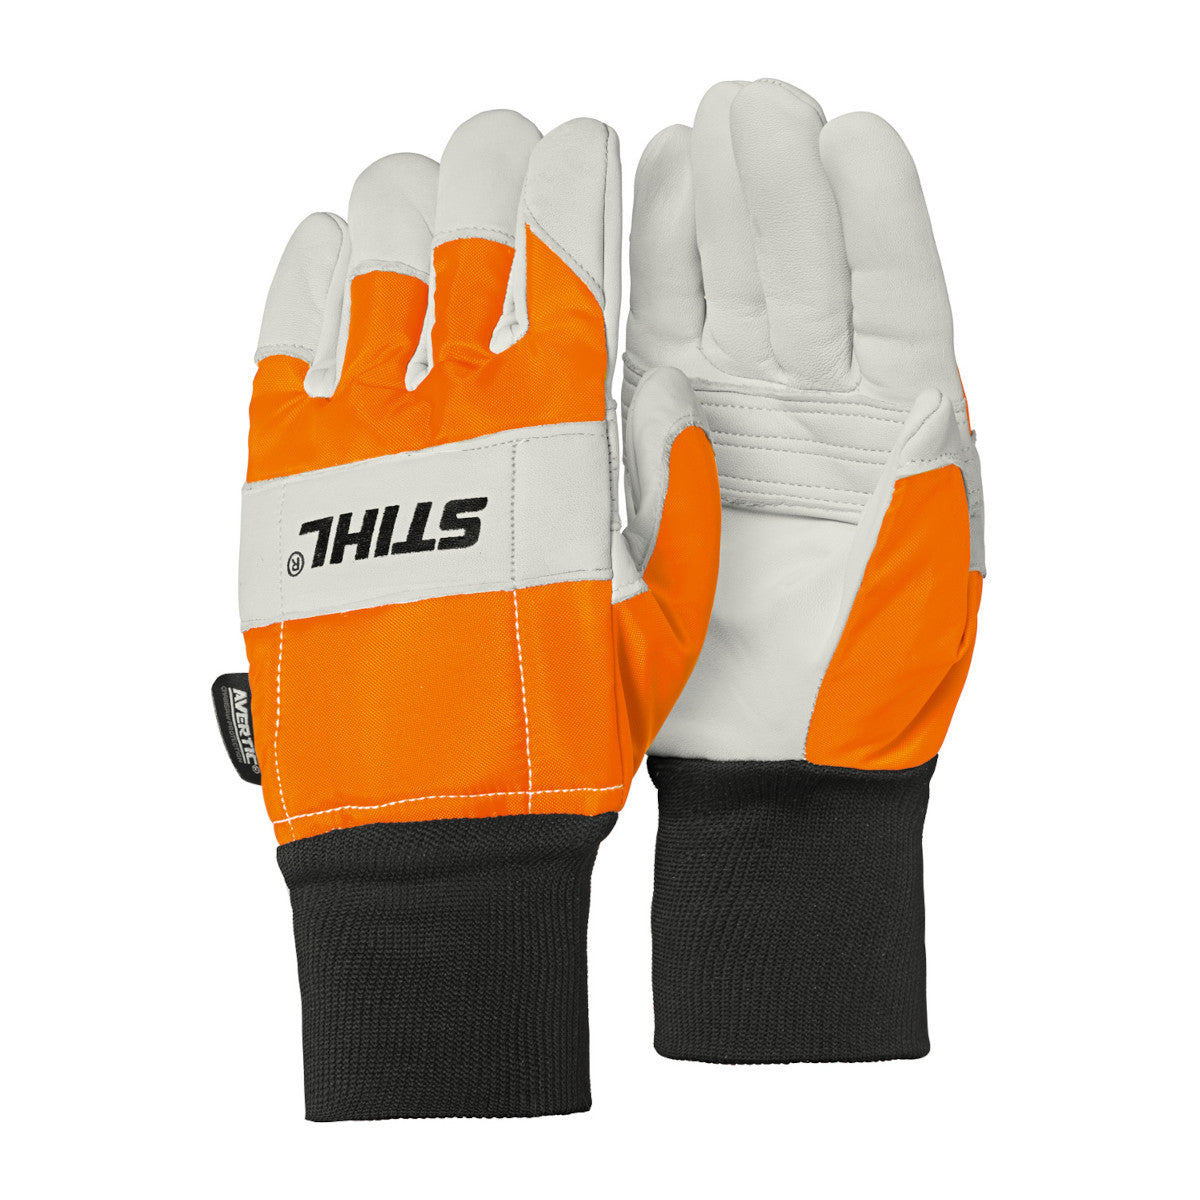 Gants anti-coupures STIHL FUNCTION MS PROTECT